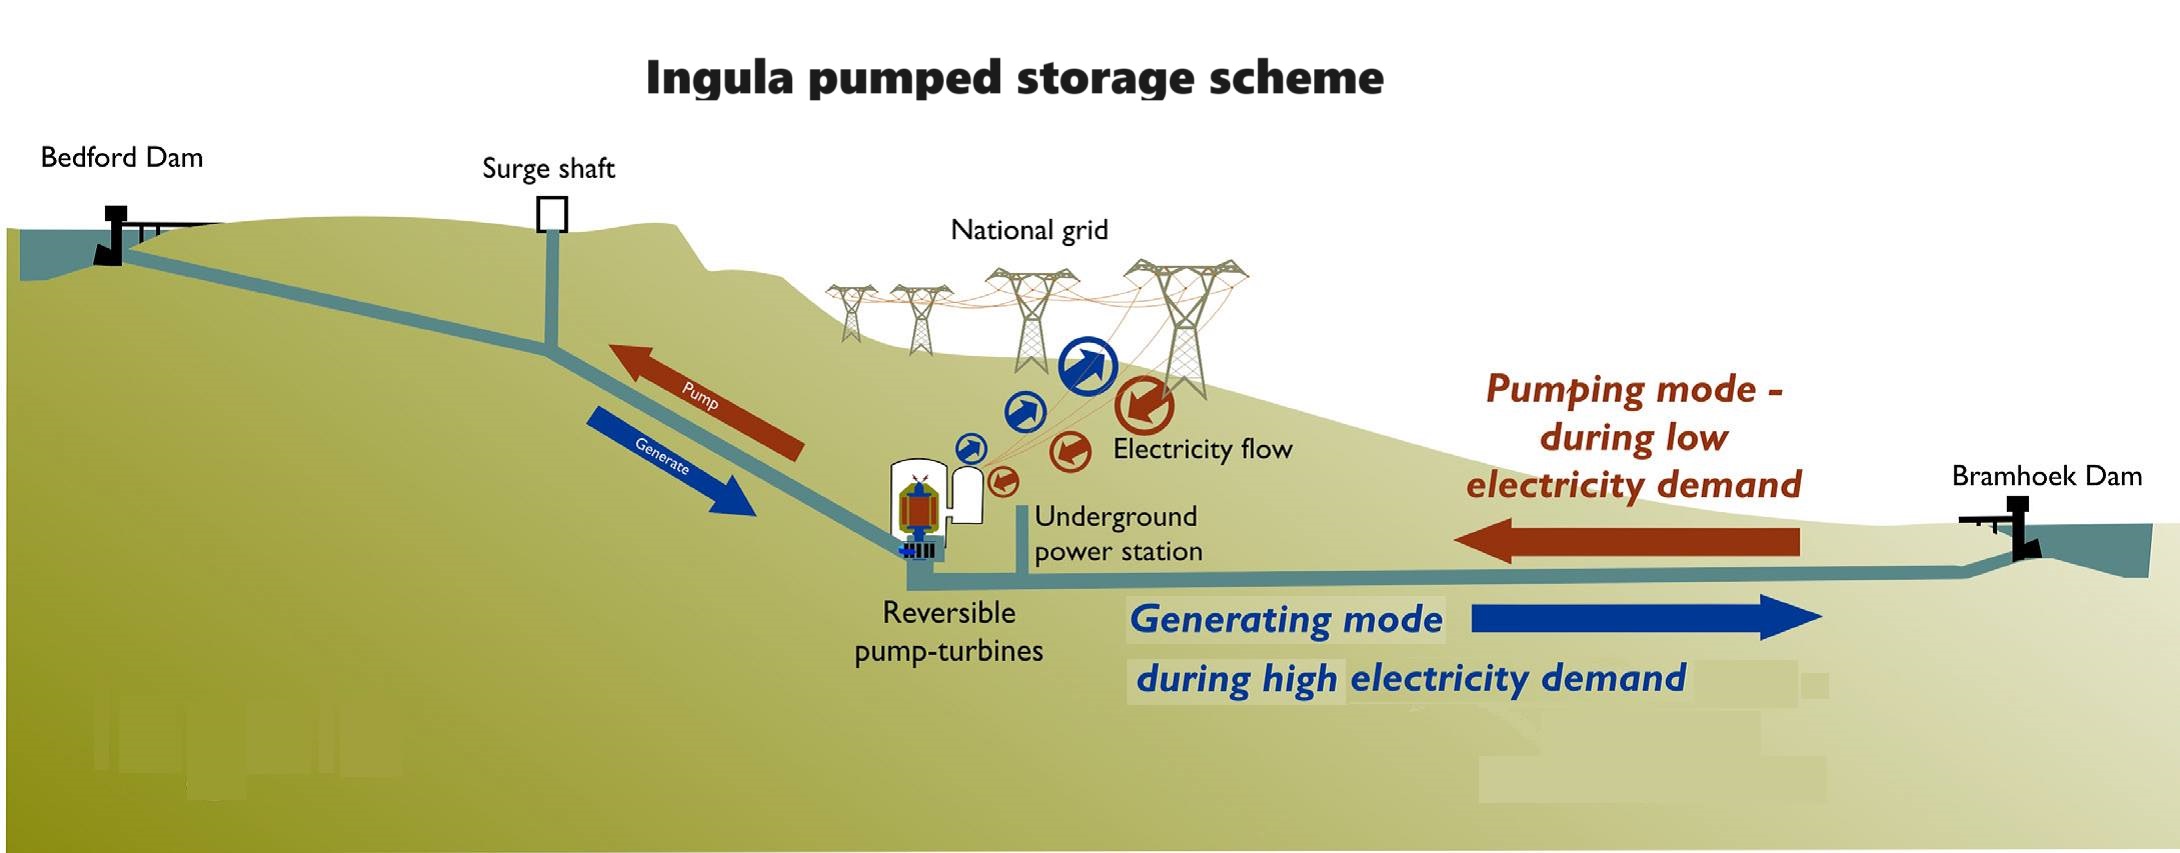 Engineering Supervision of the Erection and Commissioning Works for Ingula Pumped Storage Scheme as South Africa’s largest hydro power project to date, 2016